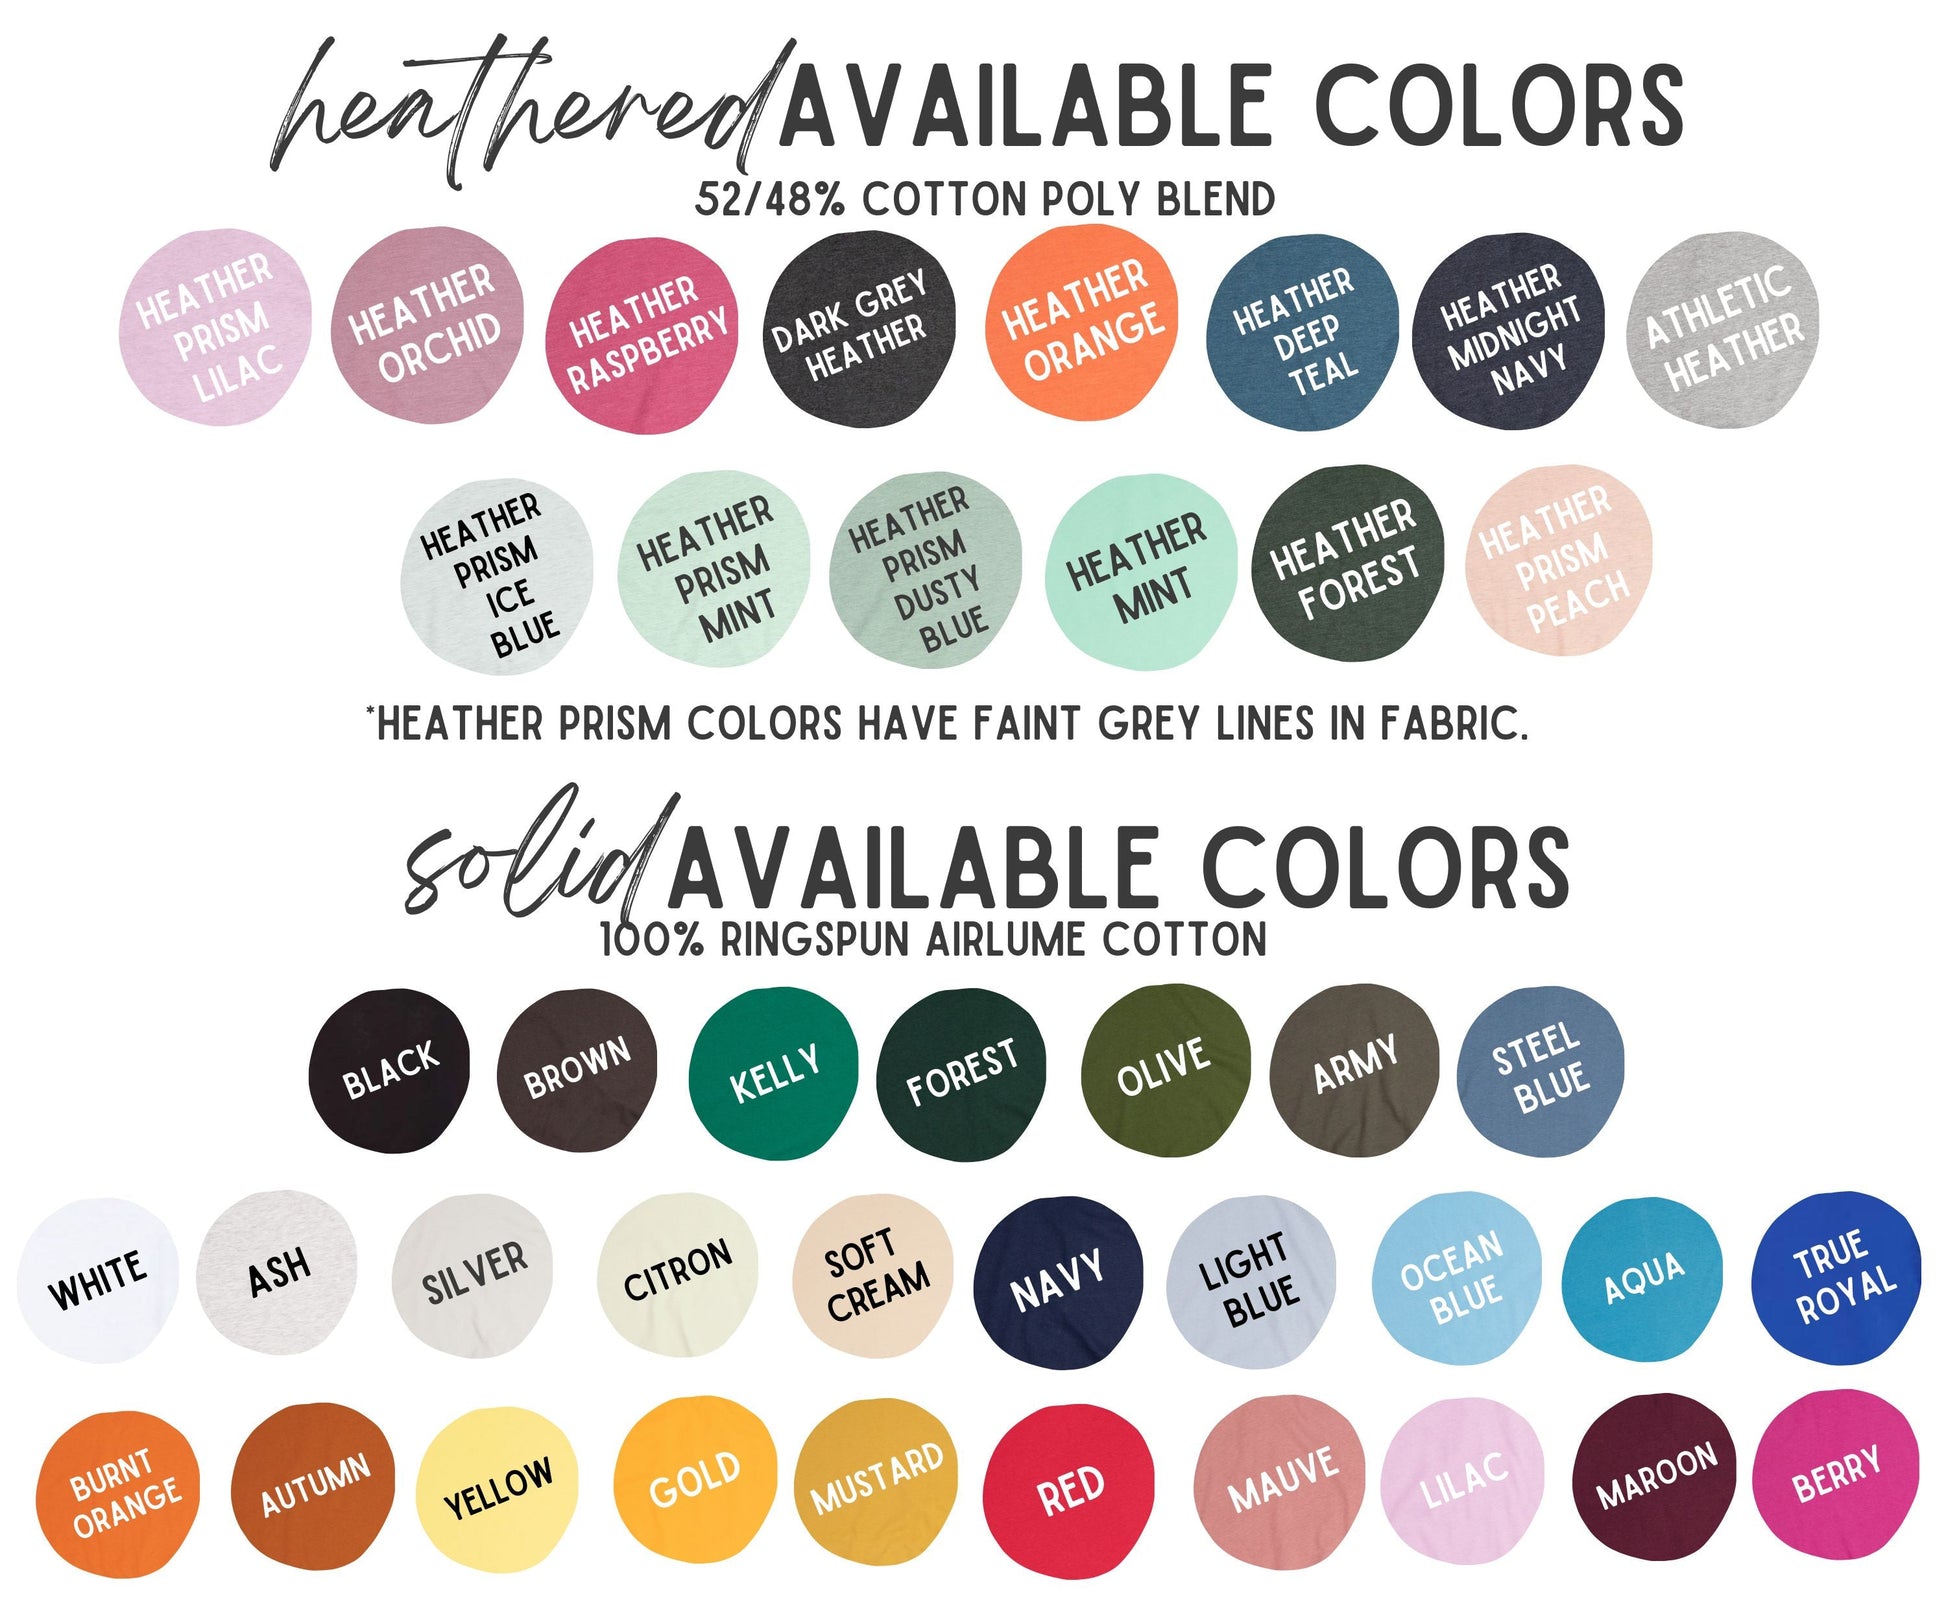 I Love This Cotton Color Chart - A Crafty Concept